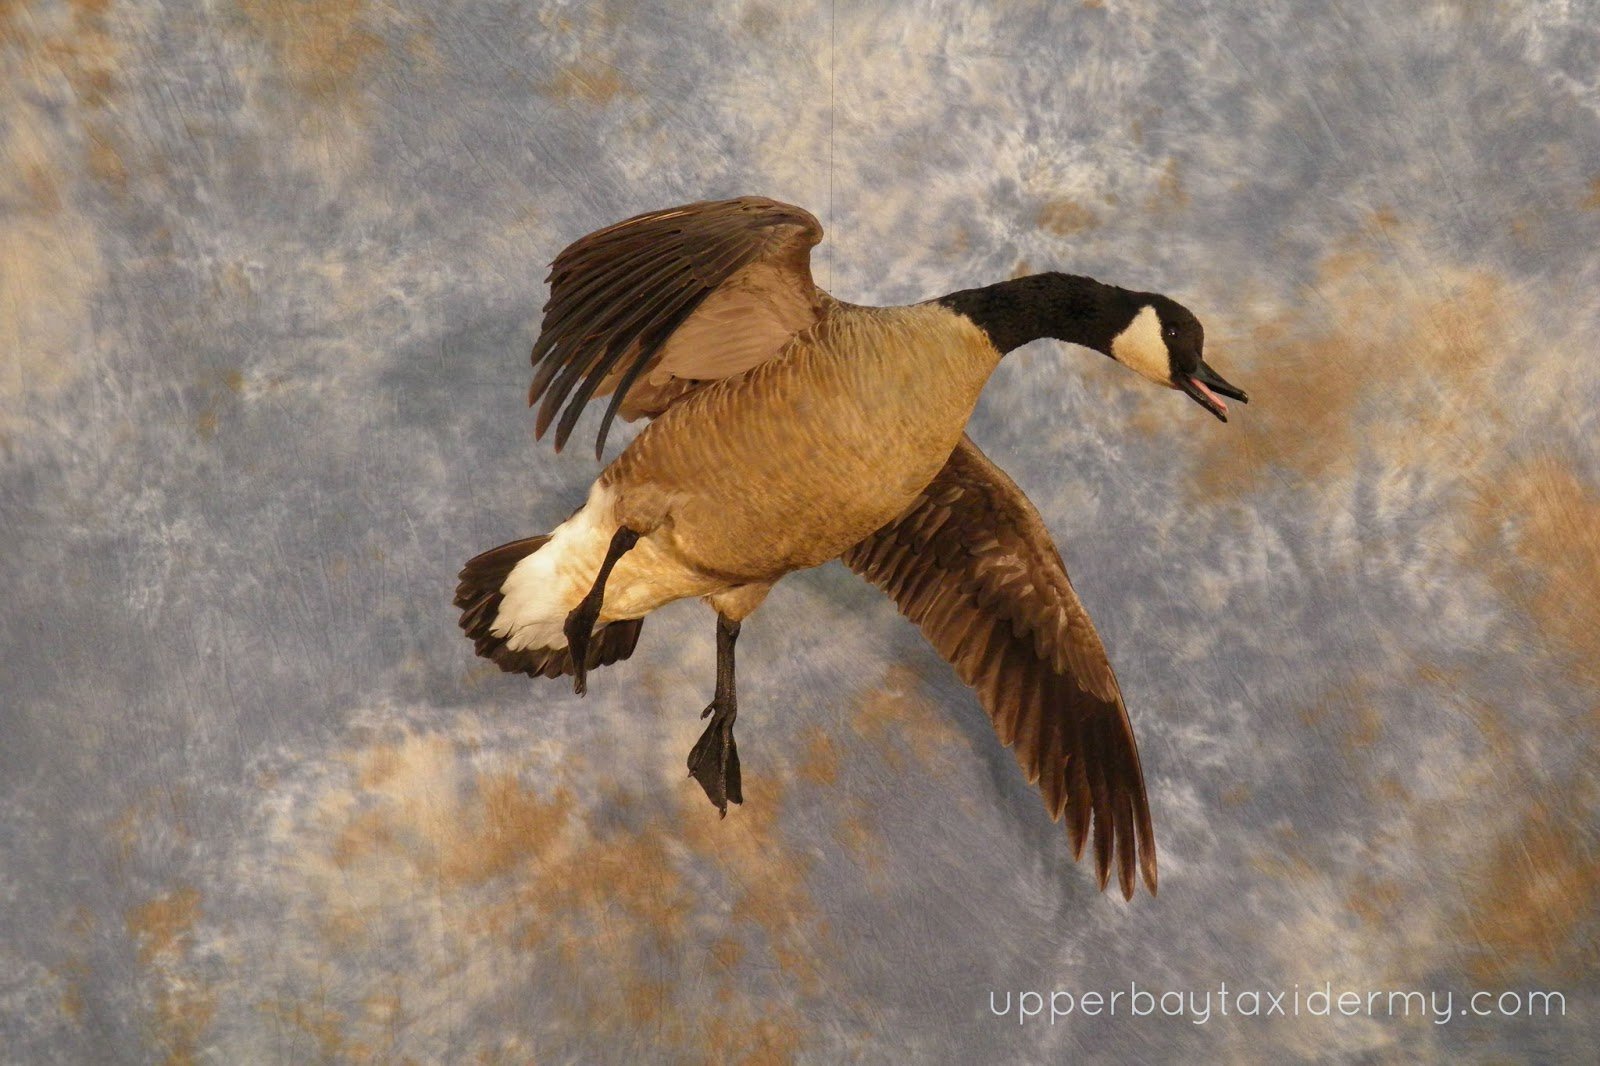 Canada Goose, Tolling Ceiling Mount, Open Mouth